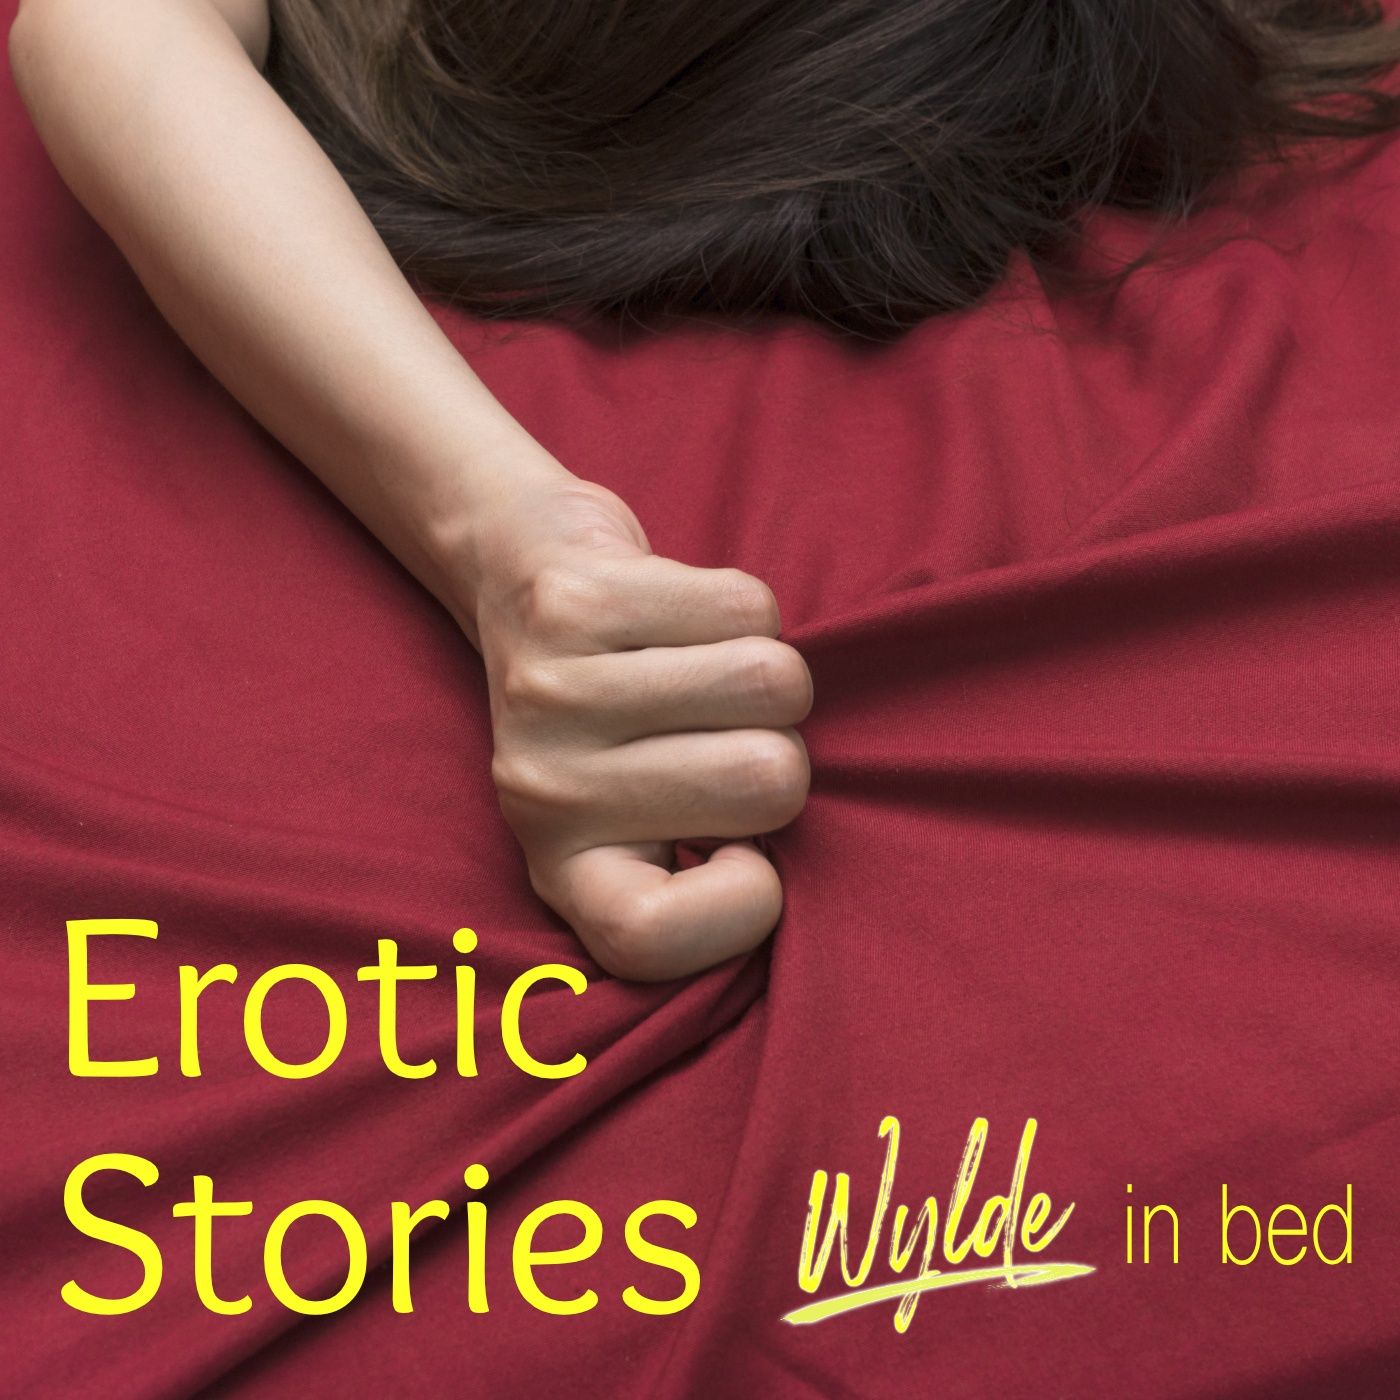 Book Bind: A strangers to Lovers Erotic Fantasy between the sheets